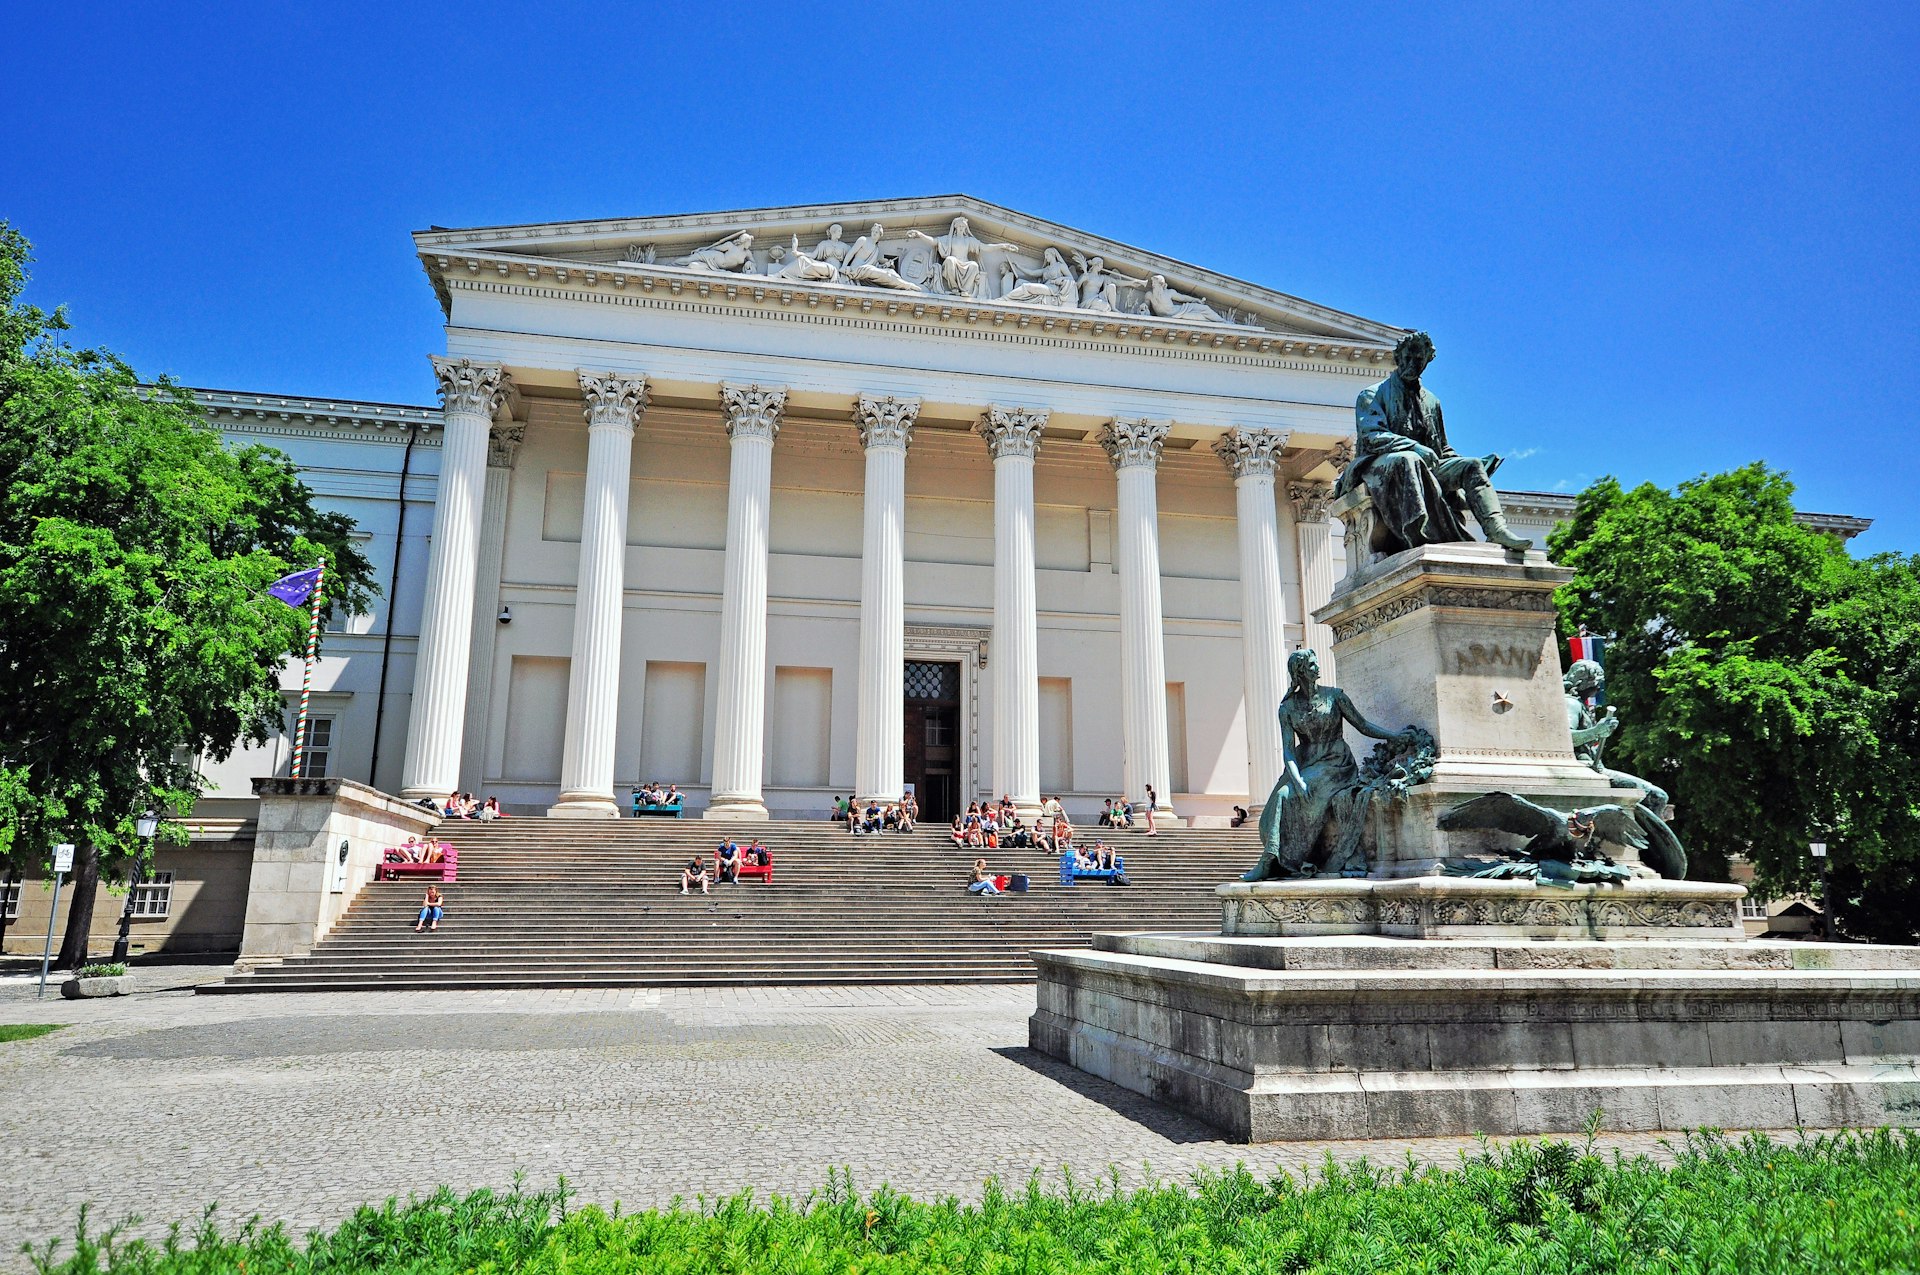 Facade of Hungarian National Museum in Budapest, a large white colonnaded building with people sat on its wide steps